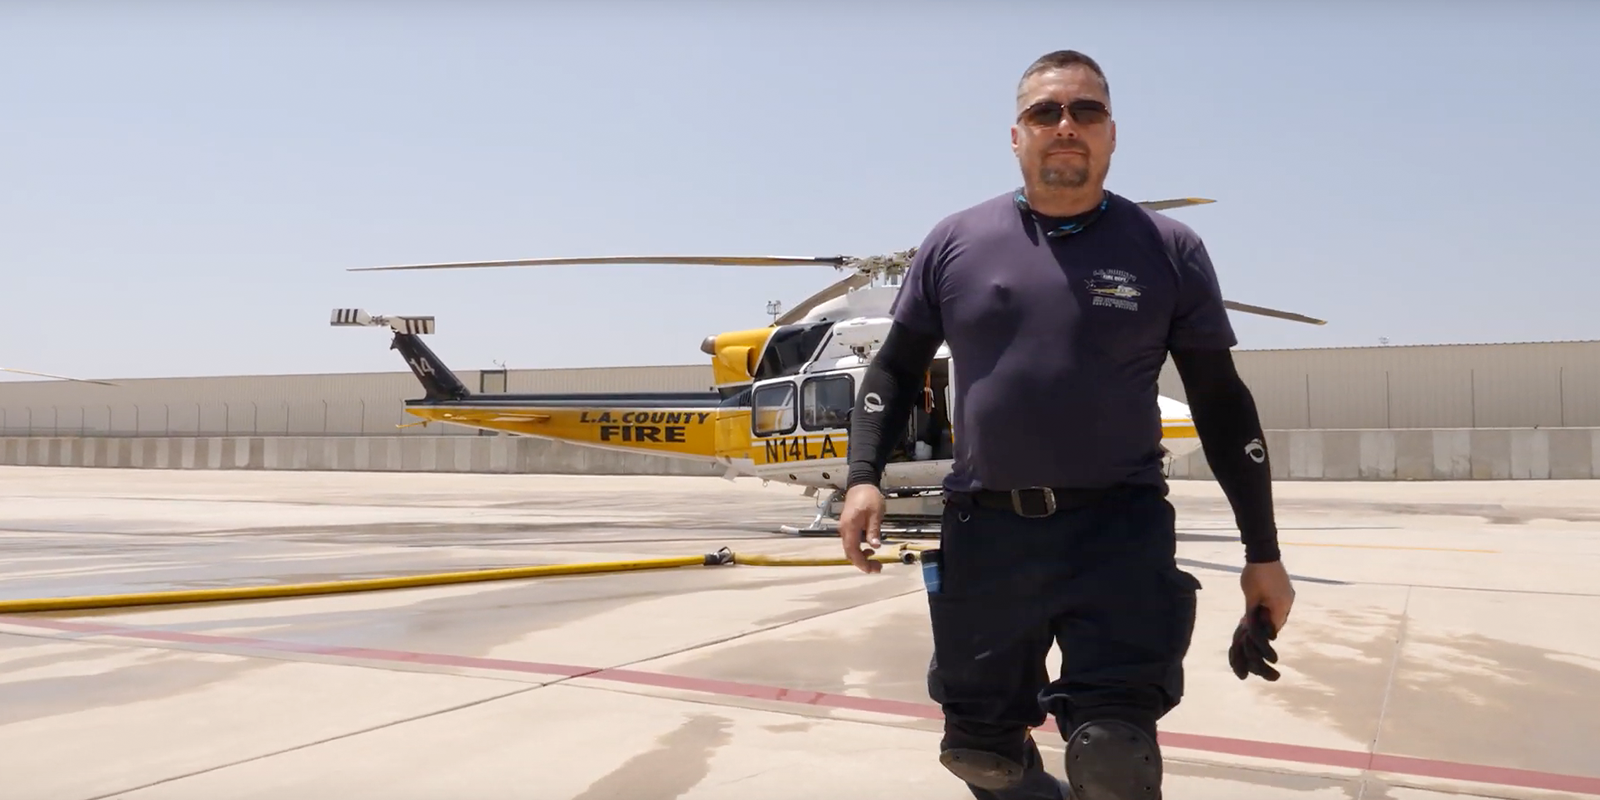 Joe Martinez poses in front of an LA County Fire Department helicopter.